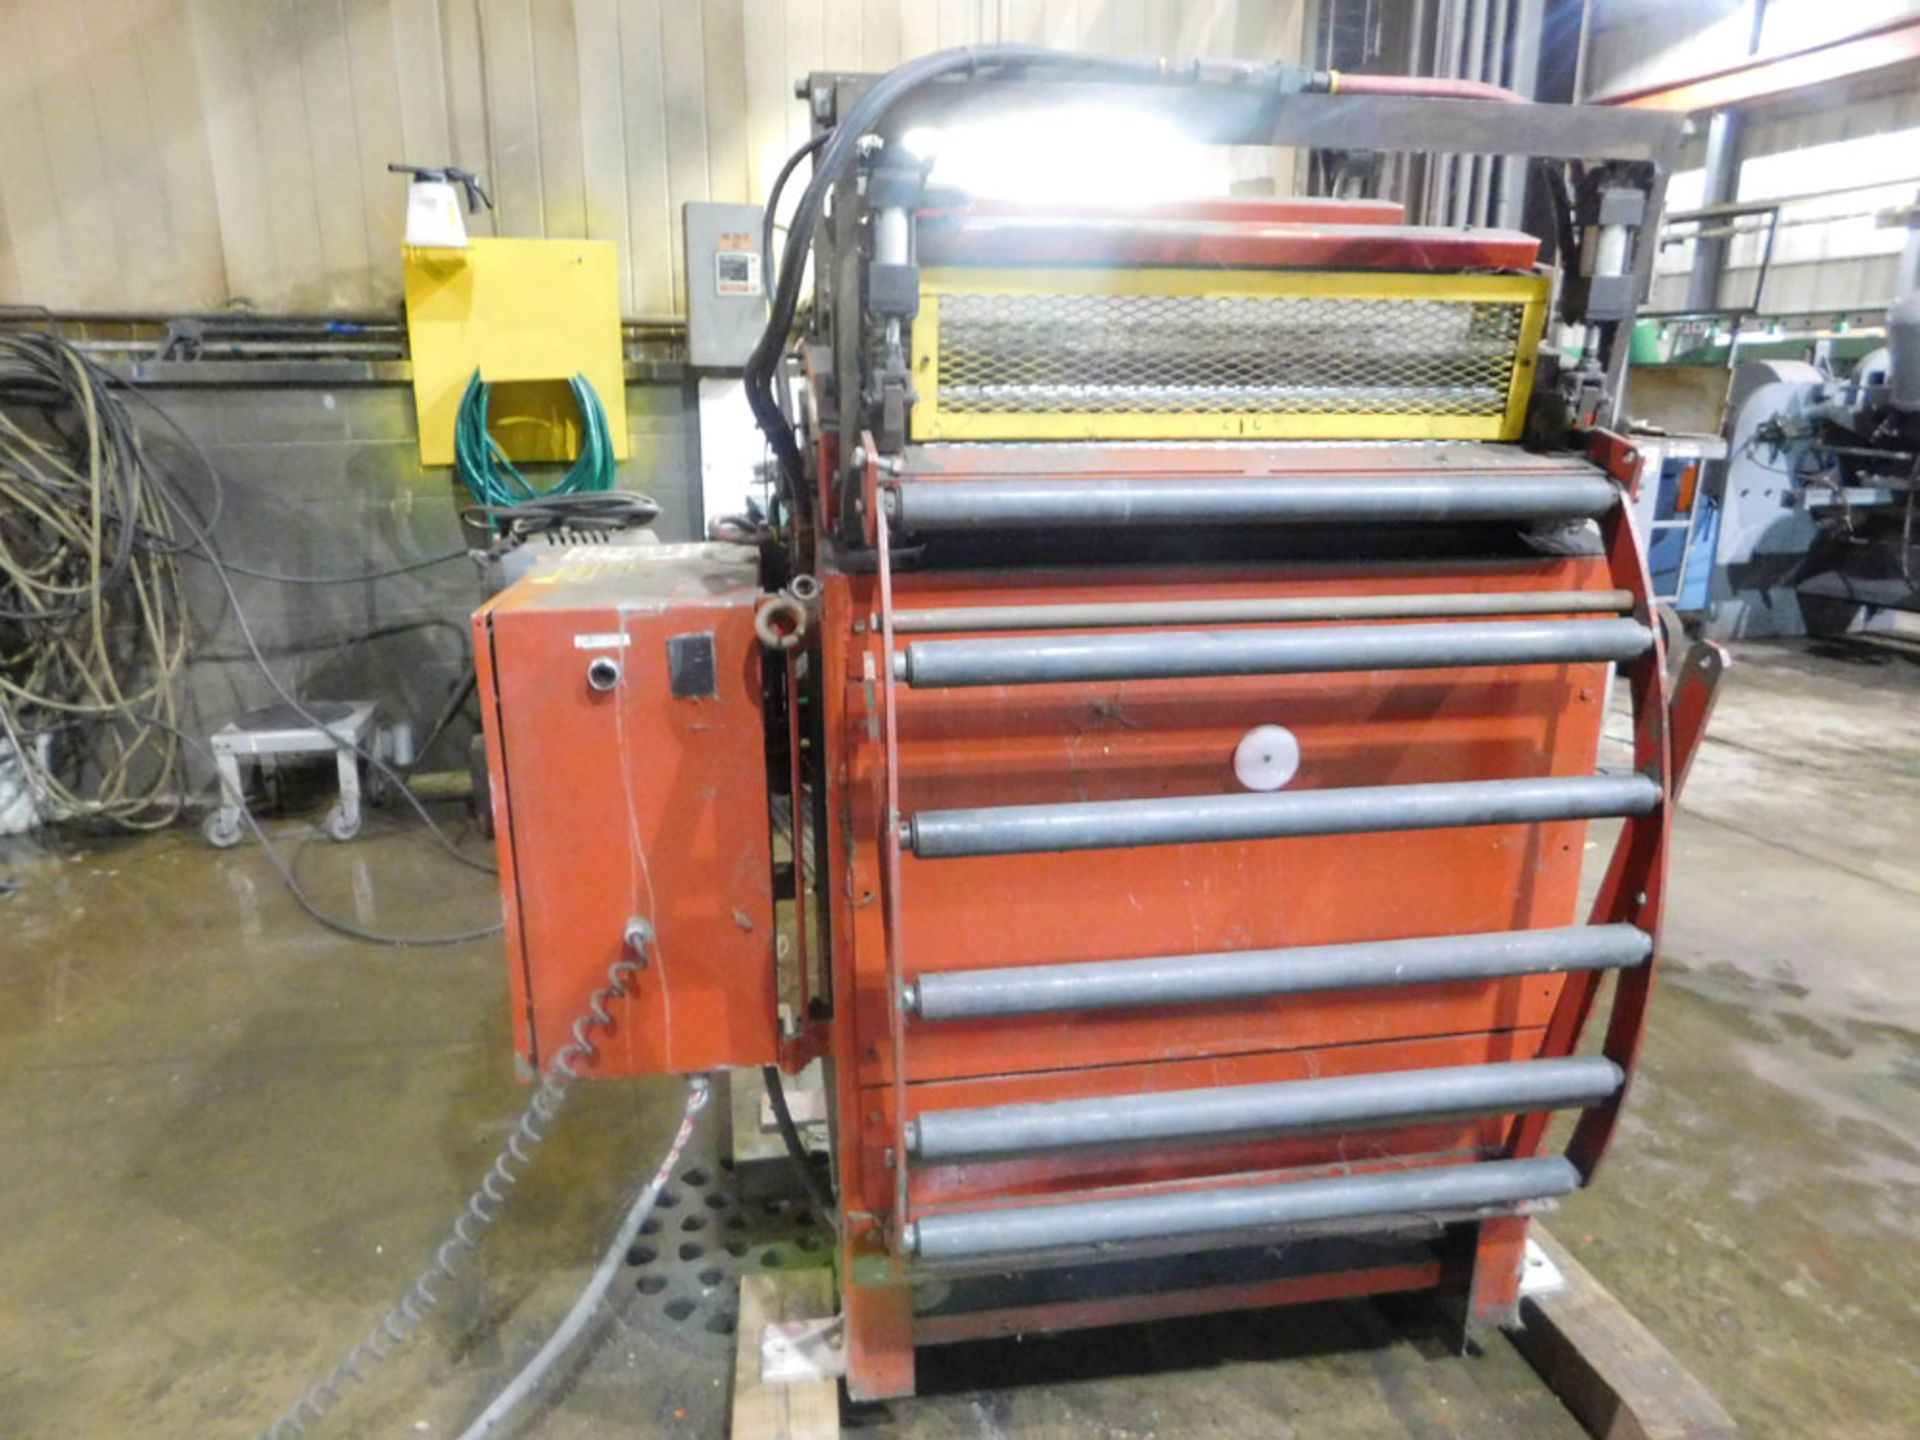 FREE LOADING - Located In: Painesville, OH - Rowe Coil Straightener, 30" x 0.065", Mdl: B30, S/N: - Image 5 of 8